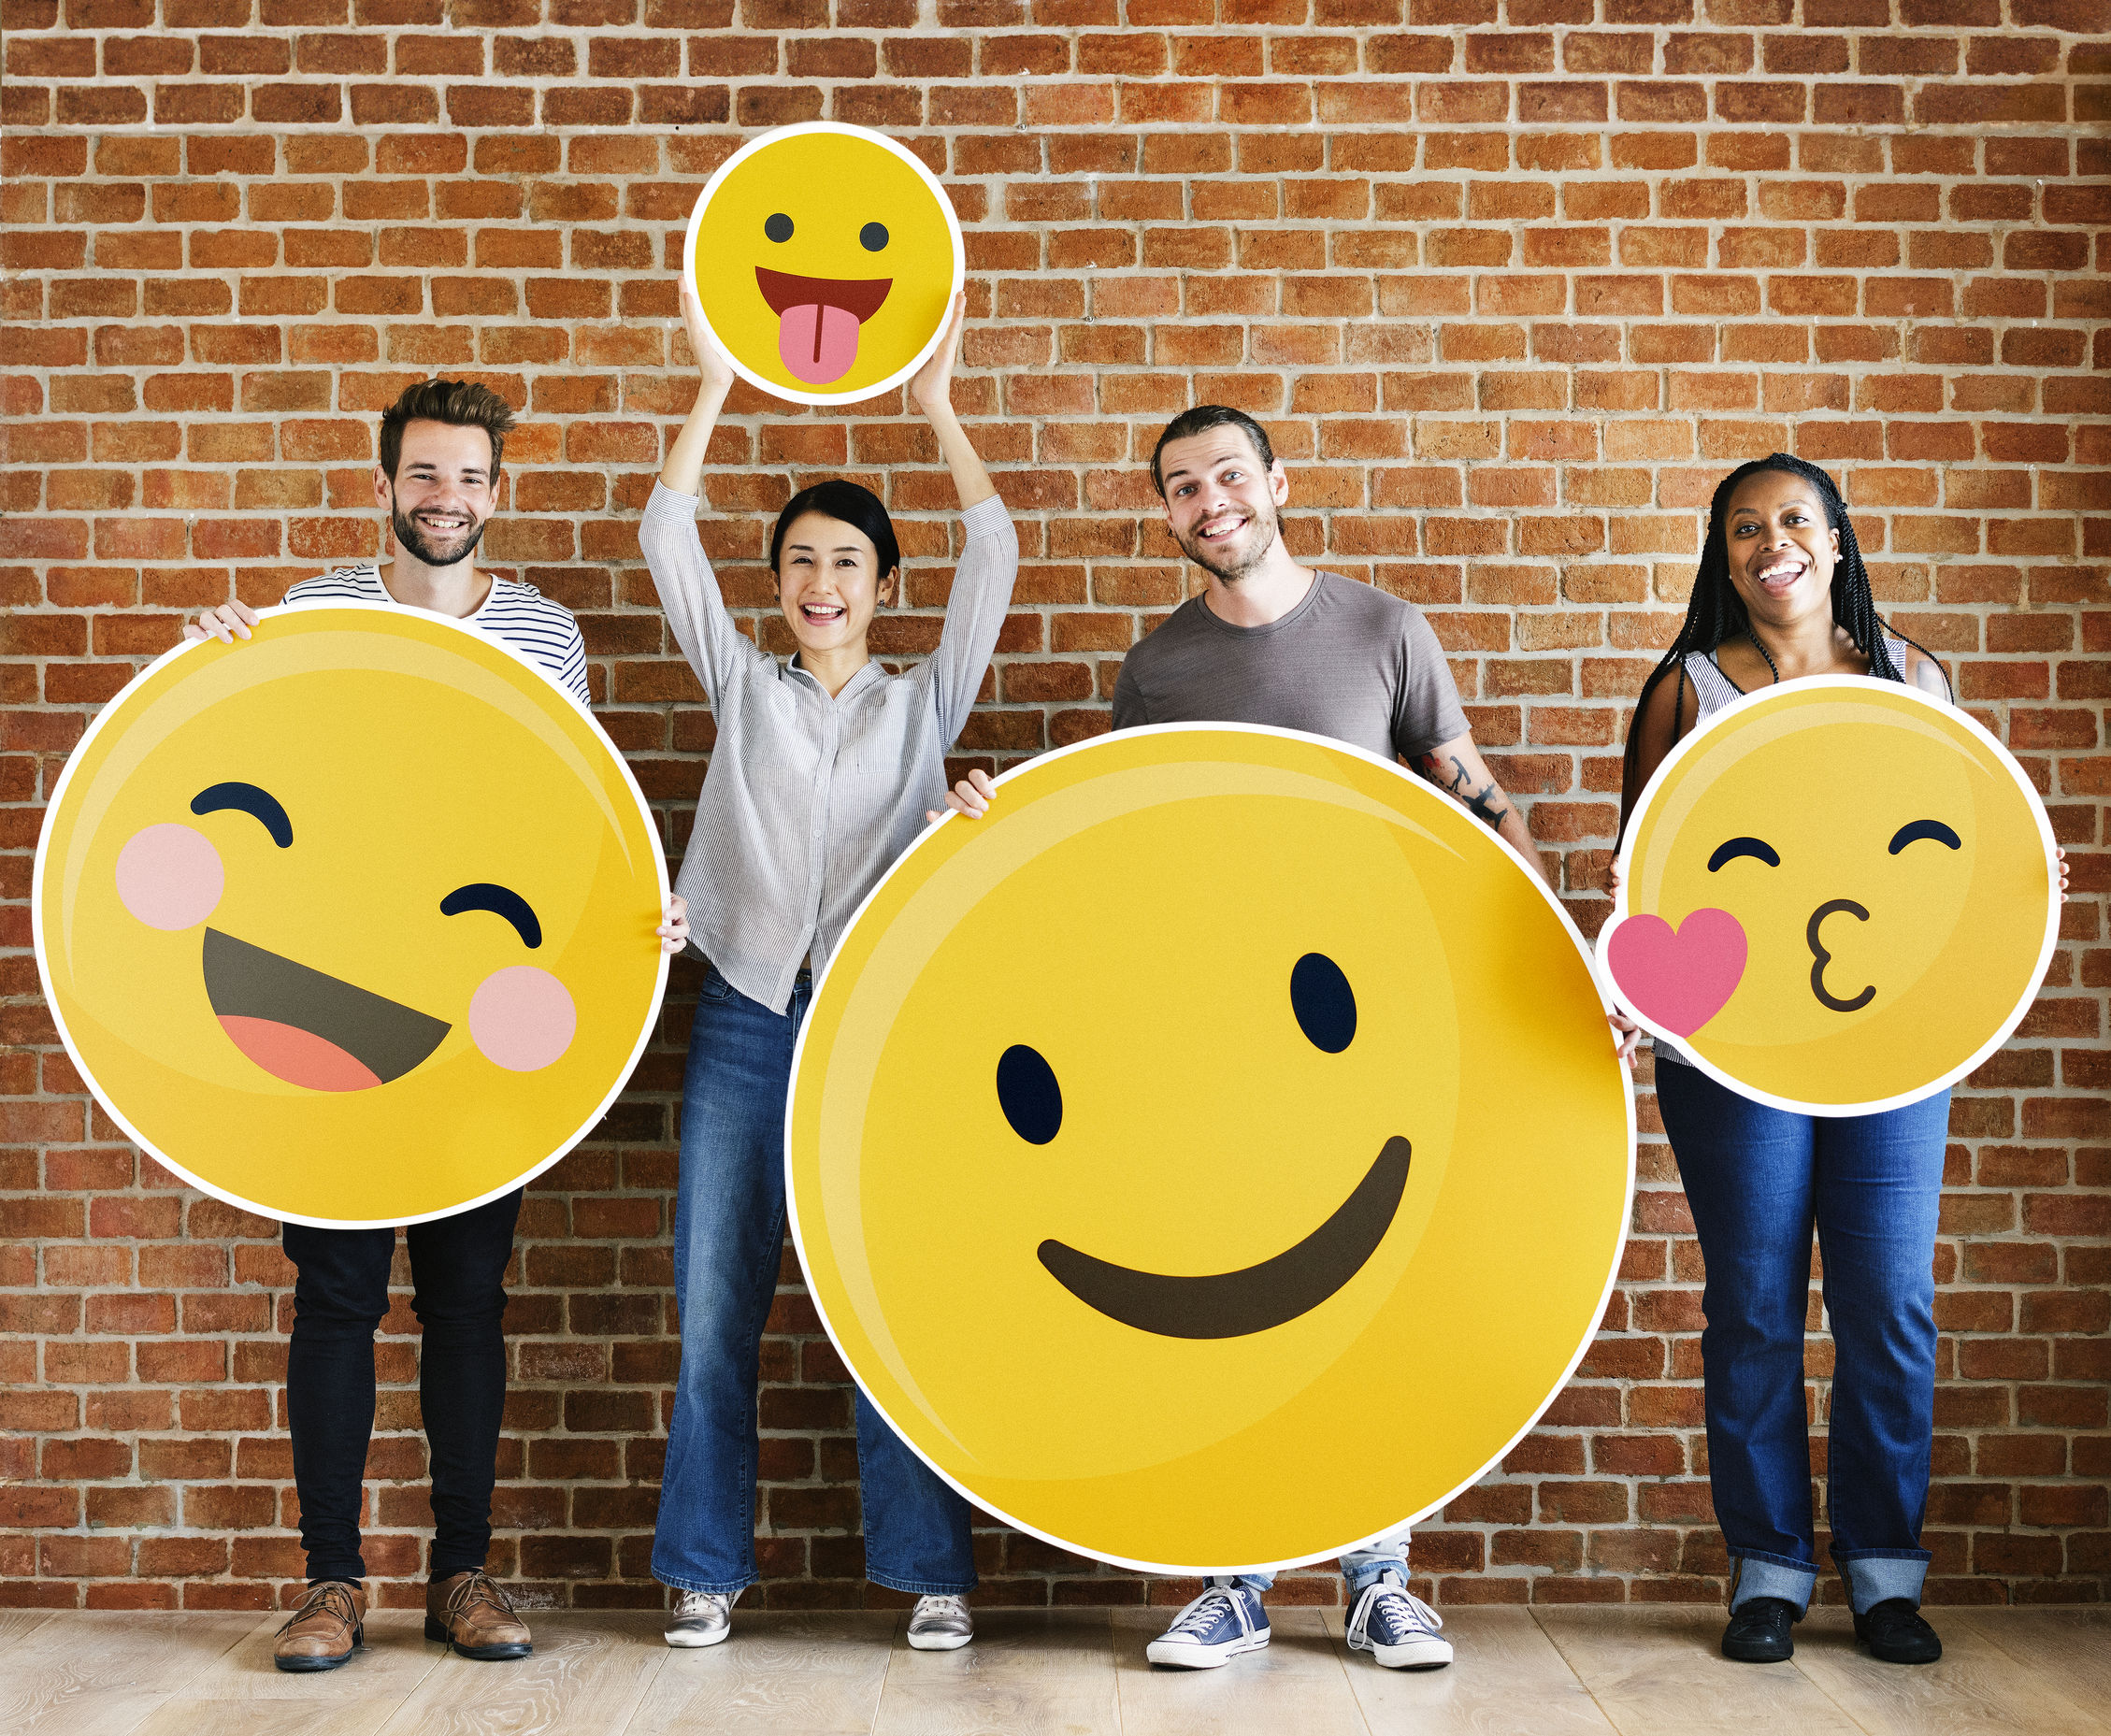 A team of marketers holding cardboard cutouts of various positive emoticons.